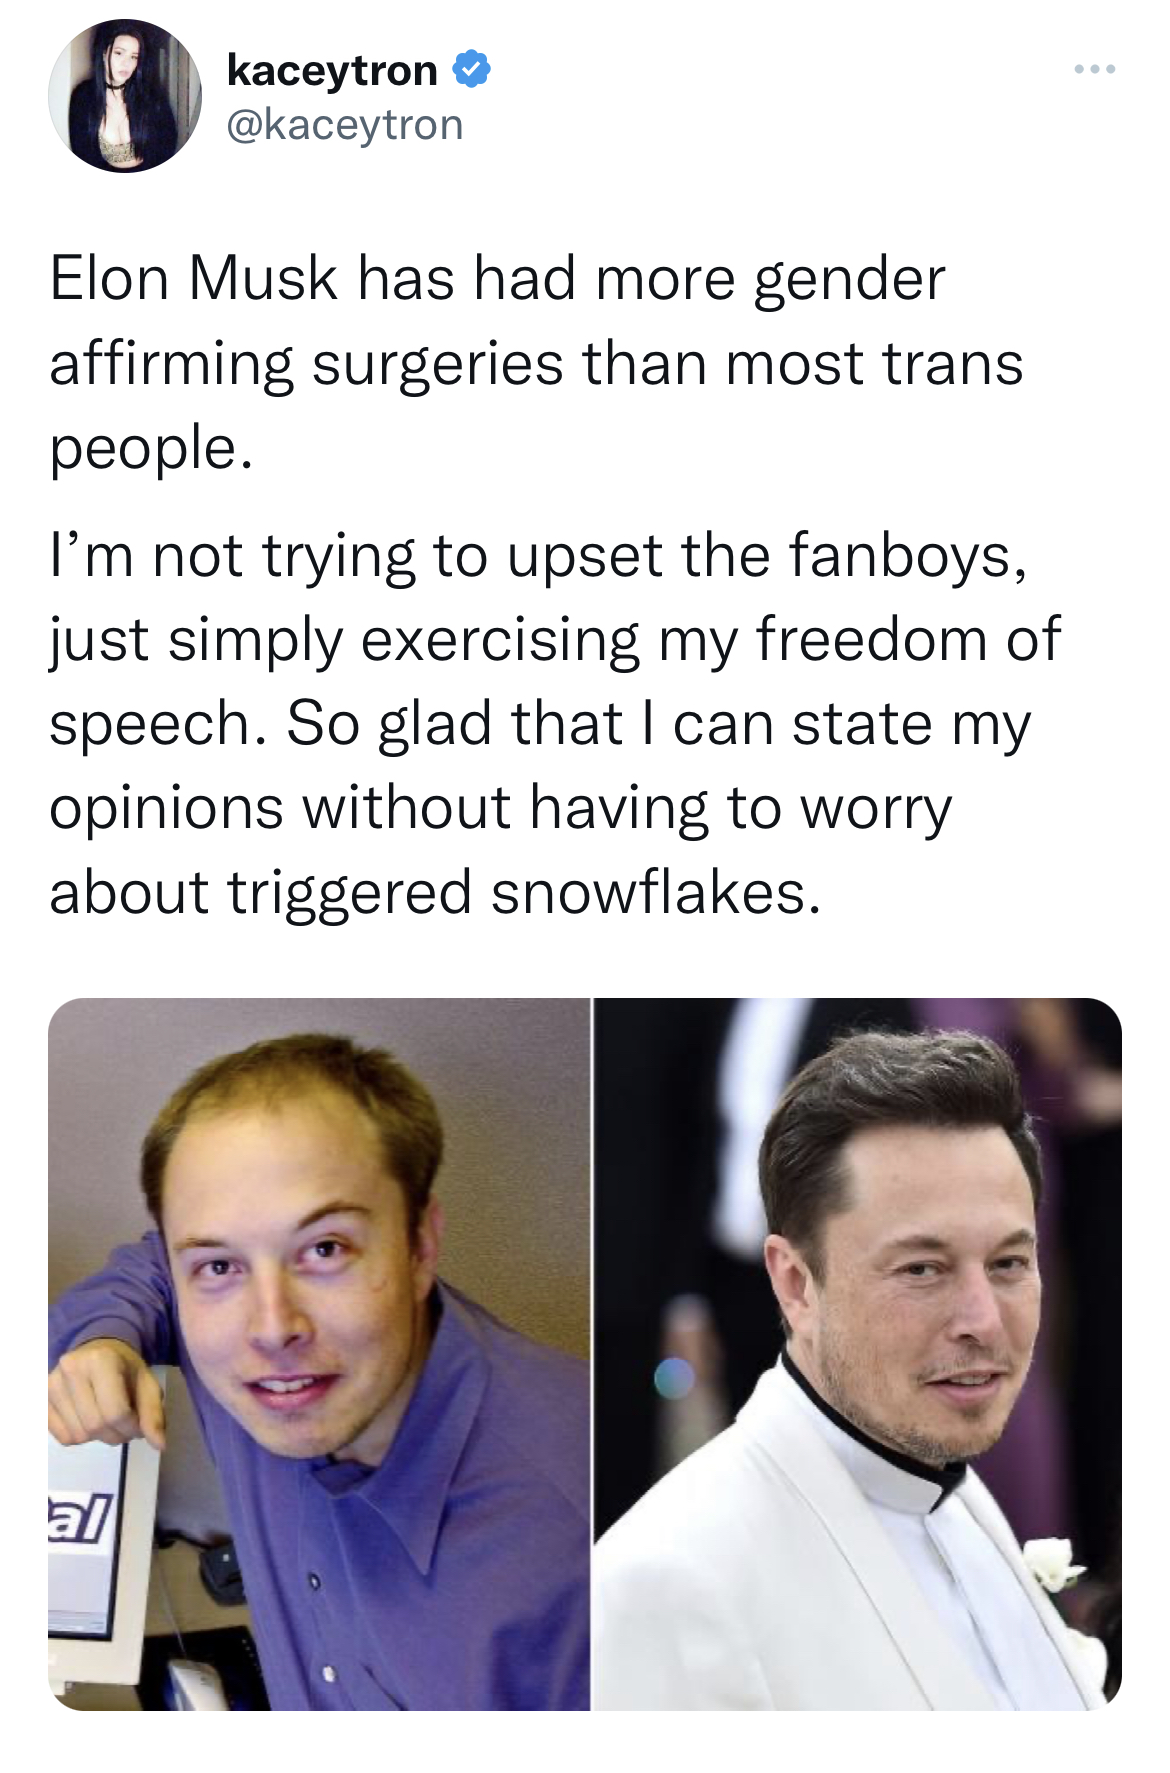 Celebs get roasted on twitter - media - 8 Elon Musk has had more gender affirming surgeries than most trans people. kaceytron I'm not trying to upset the fanboys, just simply exercising my freedom of speech. So glad that I can state my opinions without ha